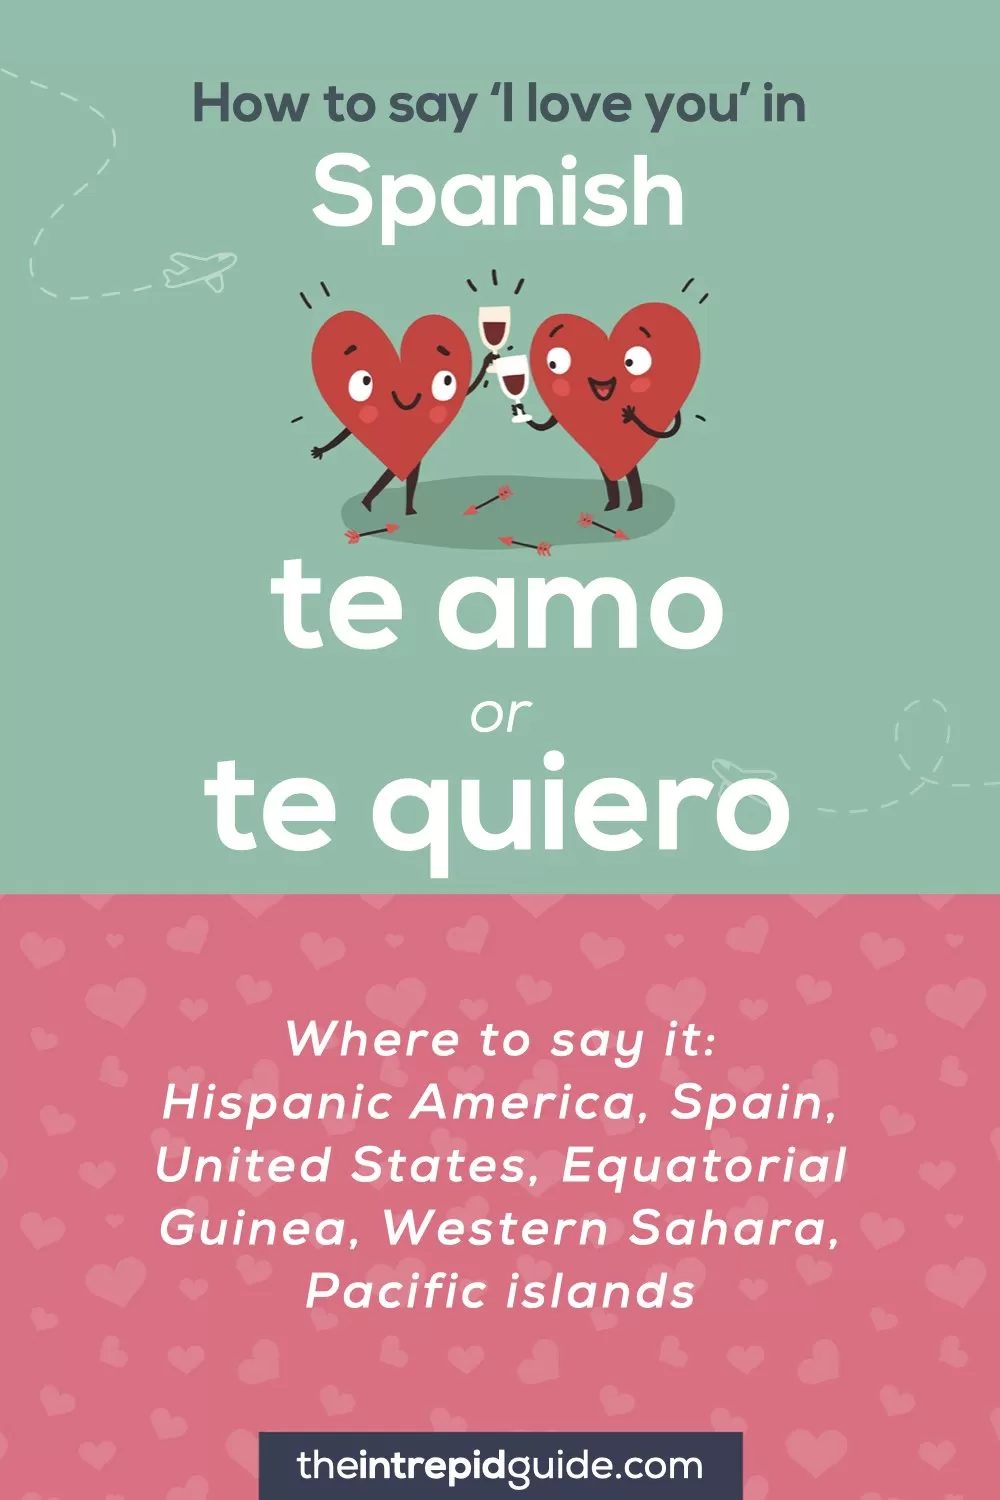 How to say I love you in different languages - Spanish - te amo, te quiero